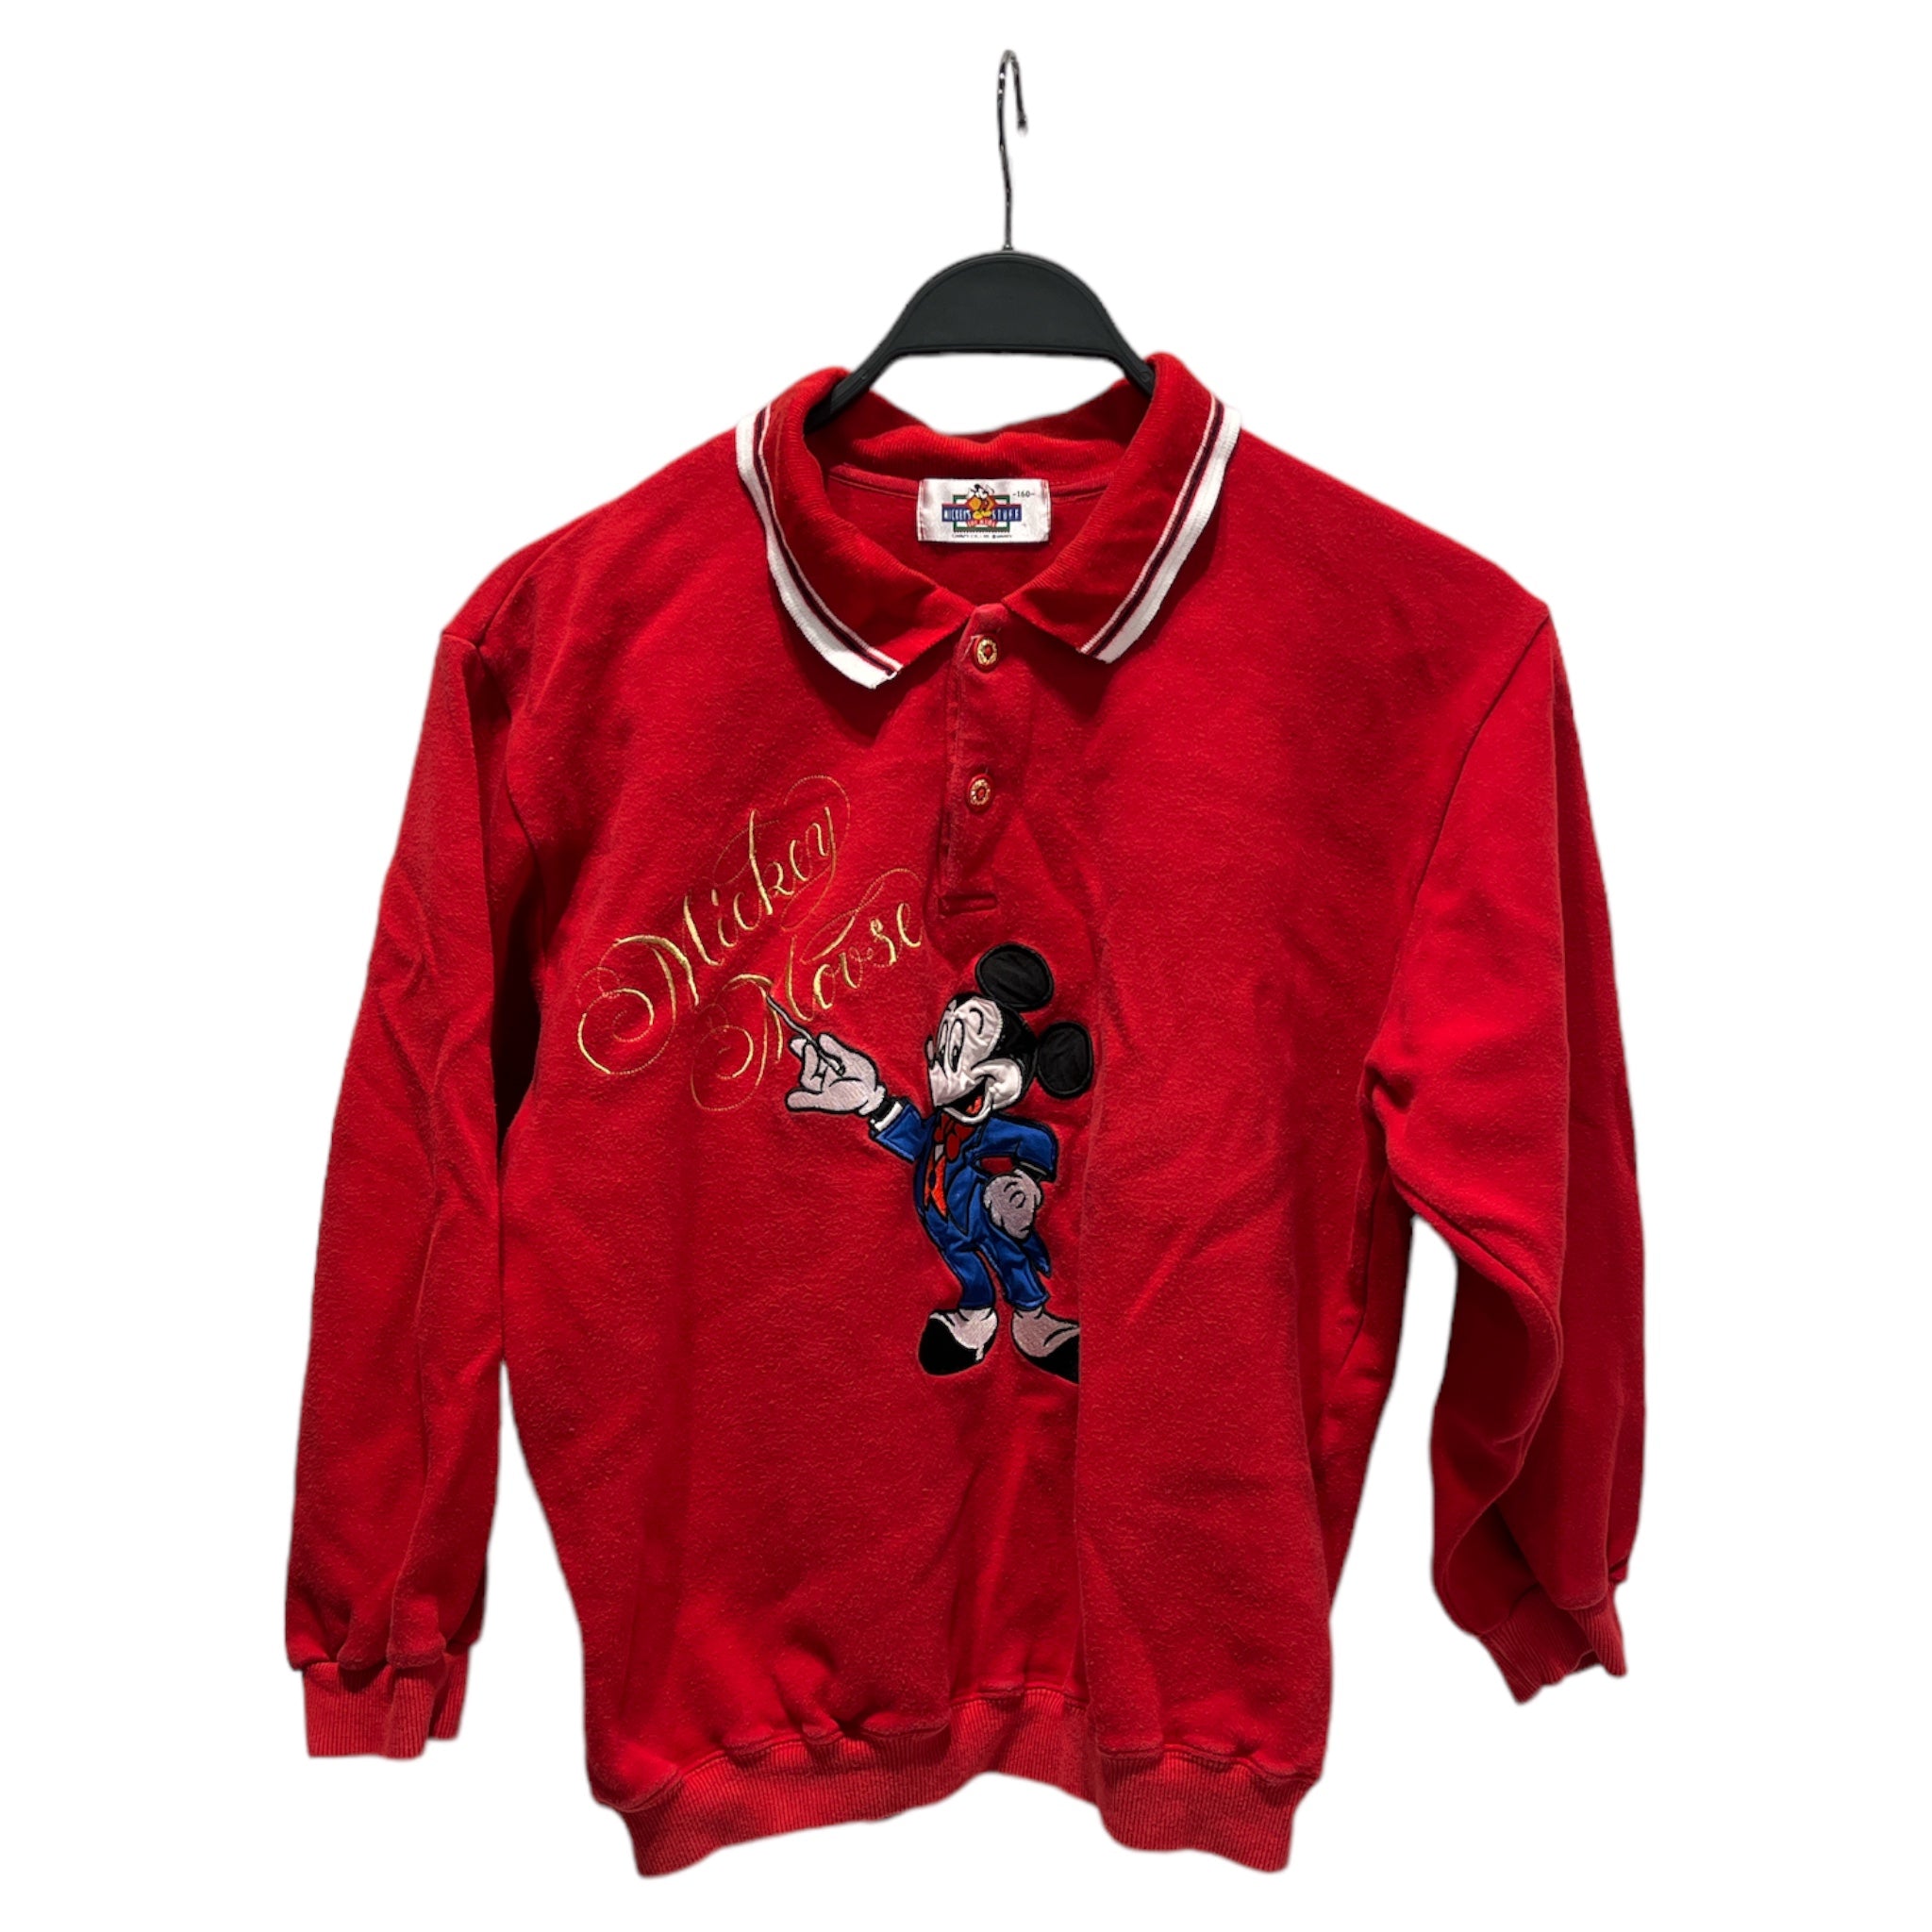 Vintage/Disney/Sweater/S/Graphic/Cotton/RED/Mickey Mouse – 2nd STREET USA